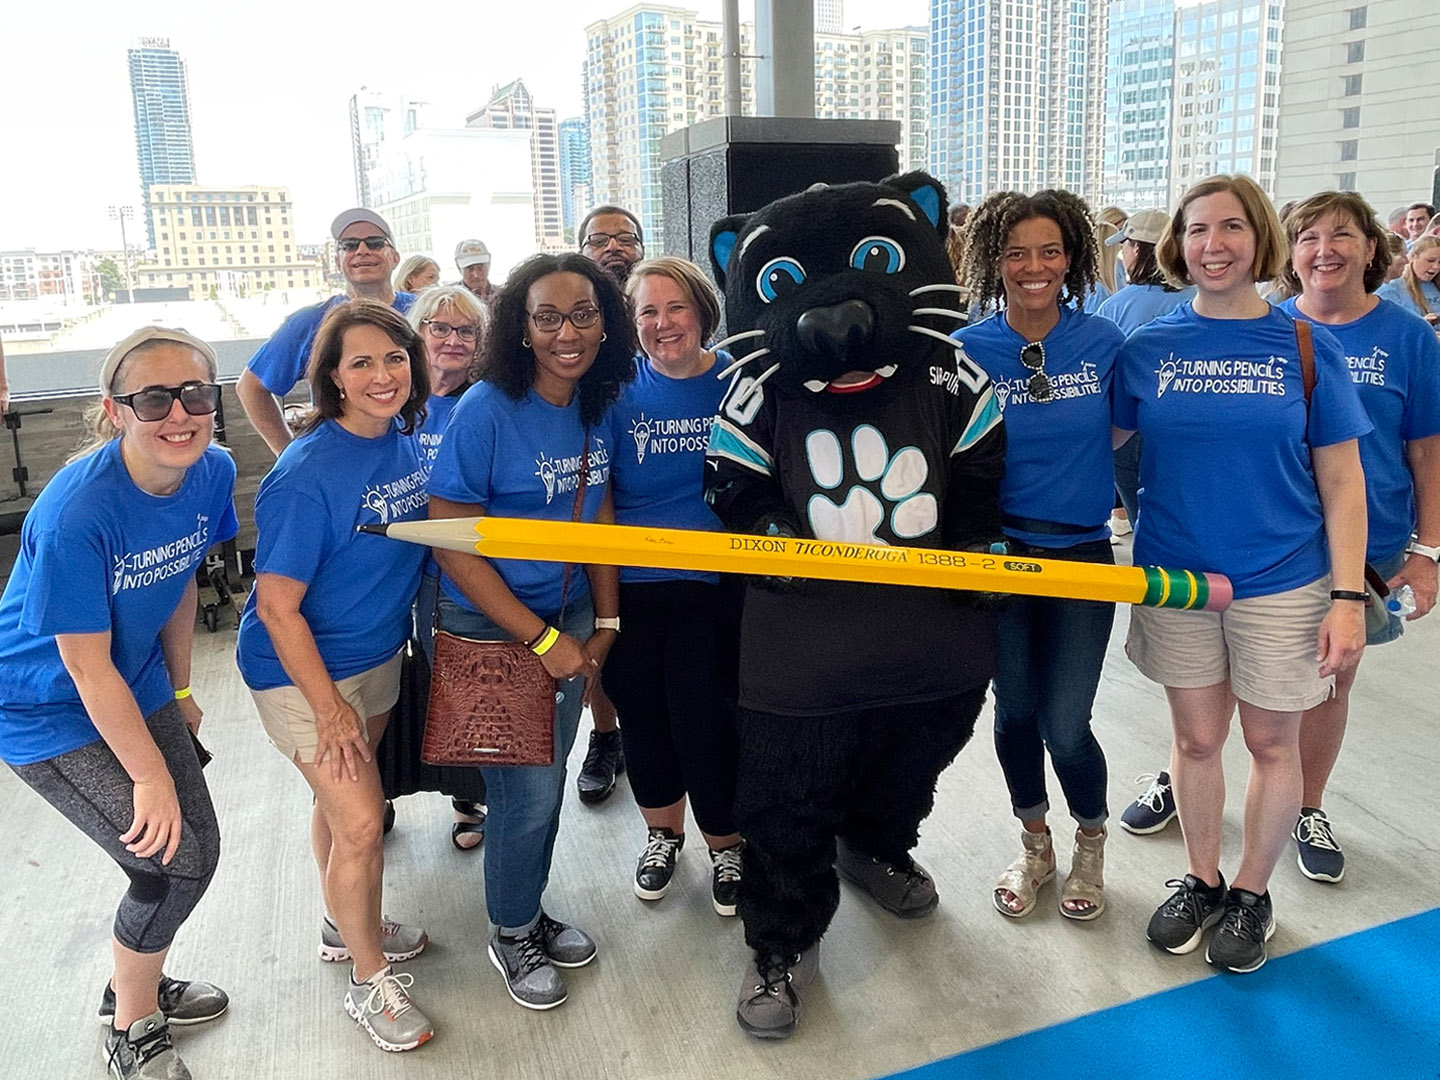 Domtar employee volunteers give back throughout the year. Pictured: Group of Domtar employees with Sir Purr (Carolina Panthers mascot) at Classroom Central event.